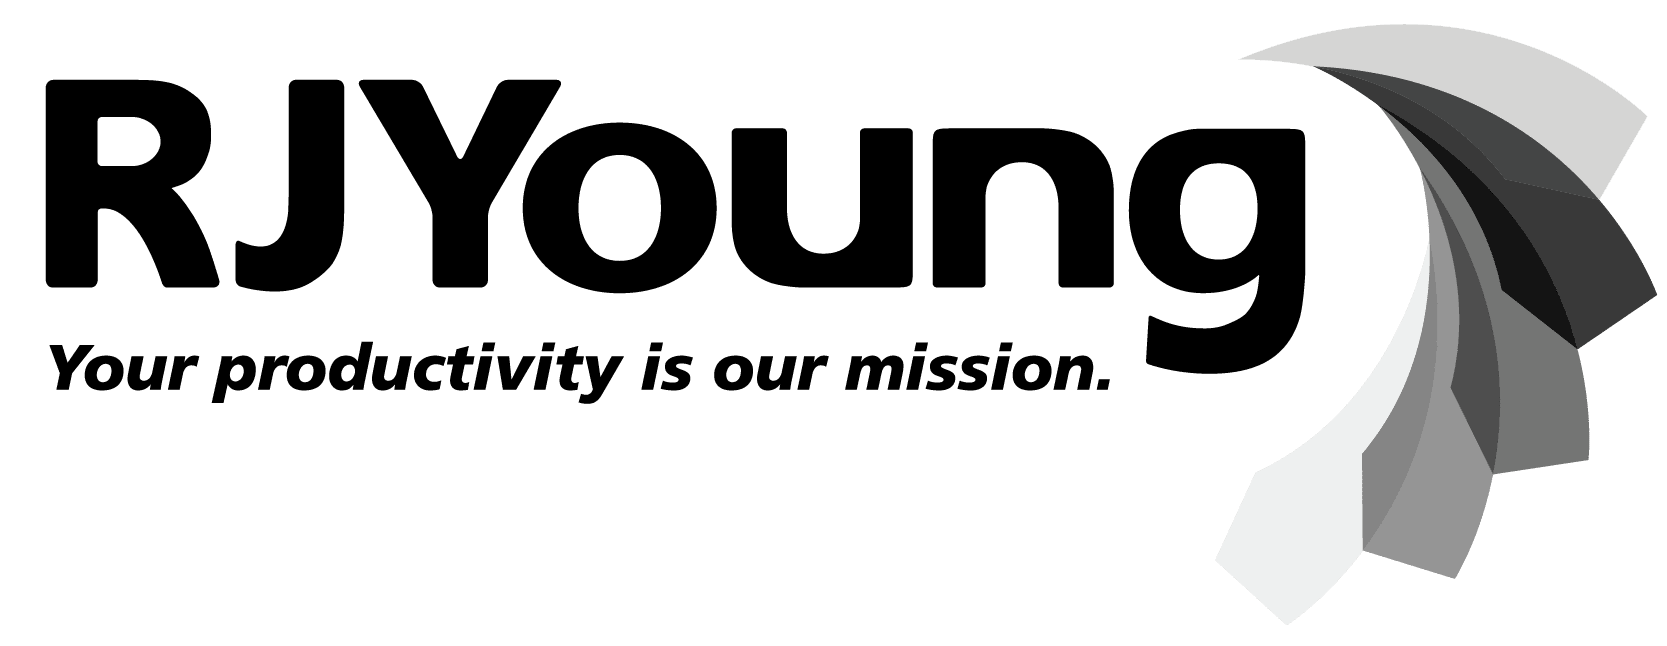 RJ Young Your productivity is our mission. black and white logo